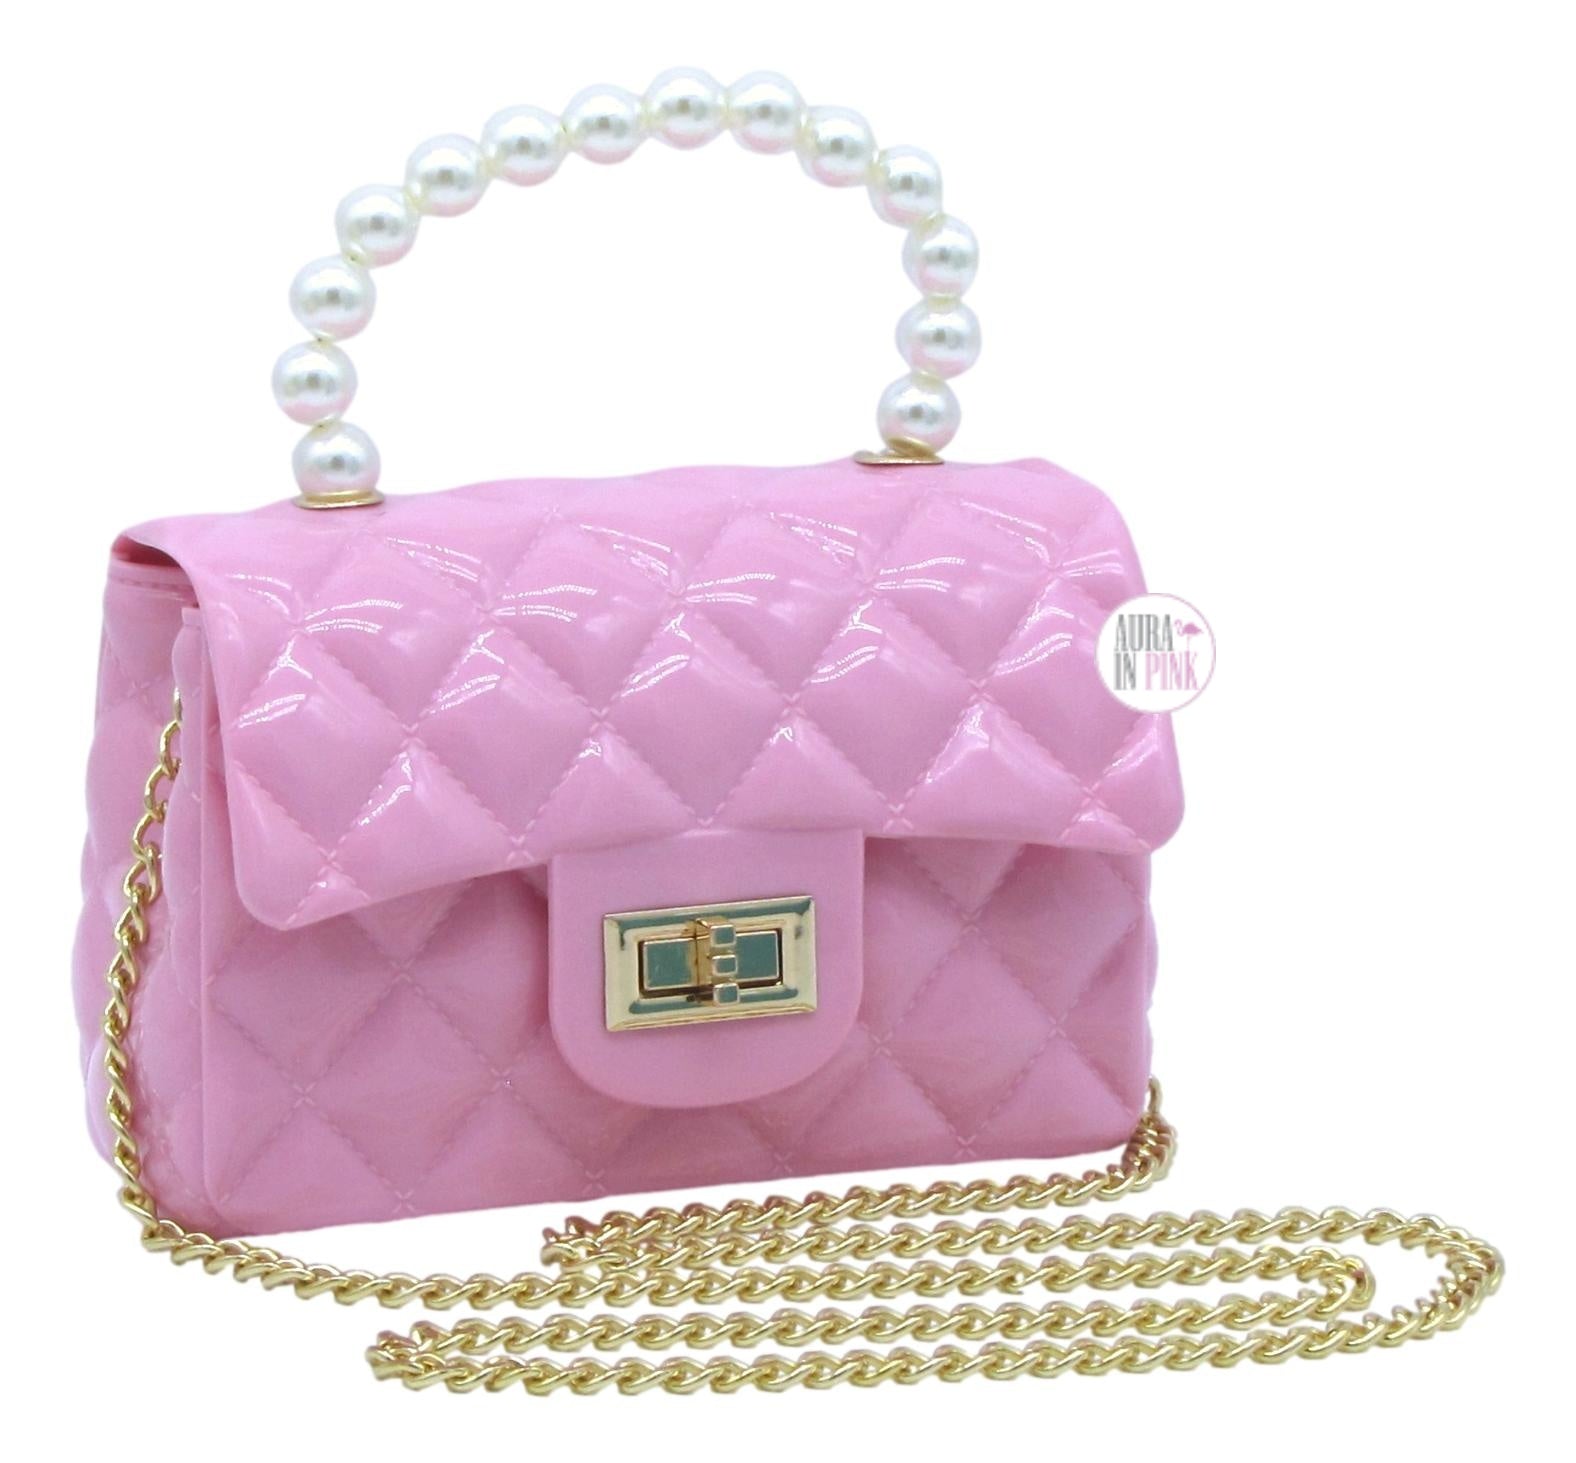 JELLY Purse MINI Kids Purse Quilted Bag Pearl Handle Chain 